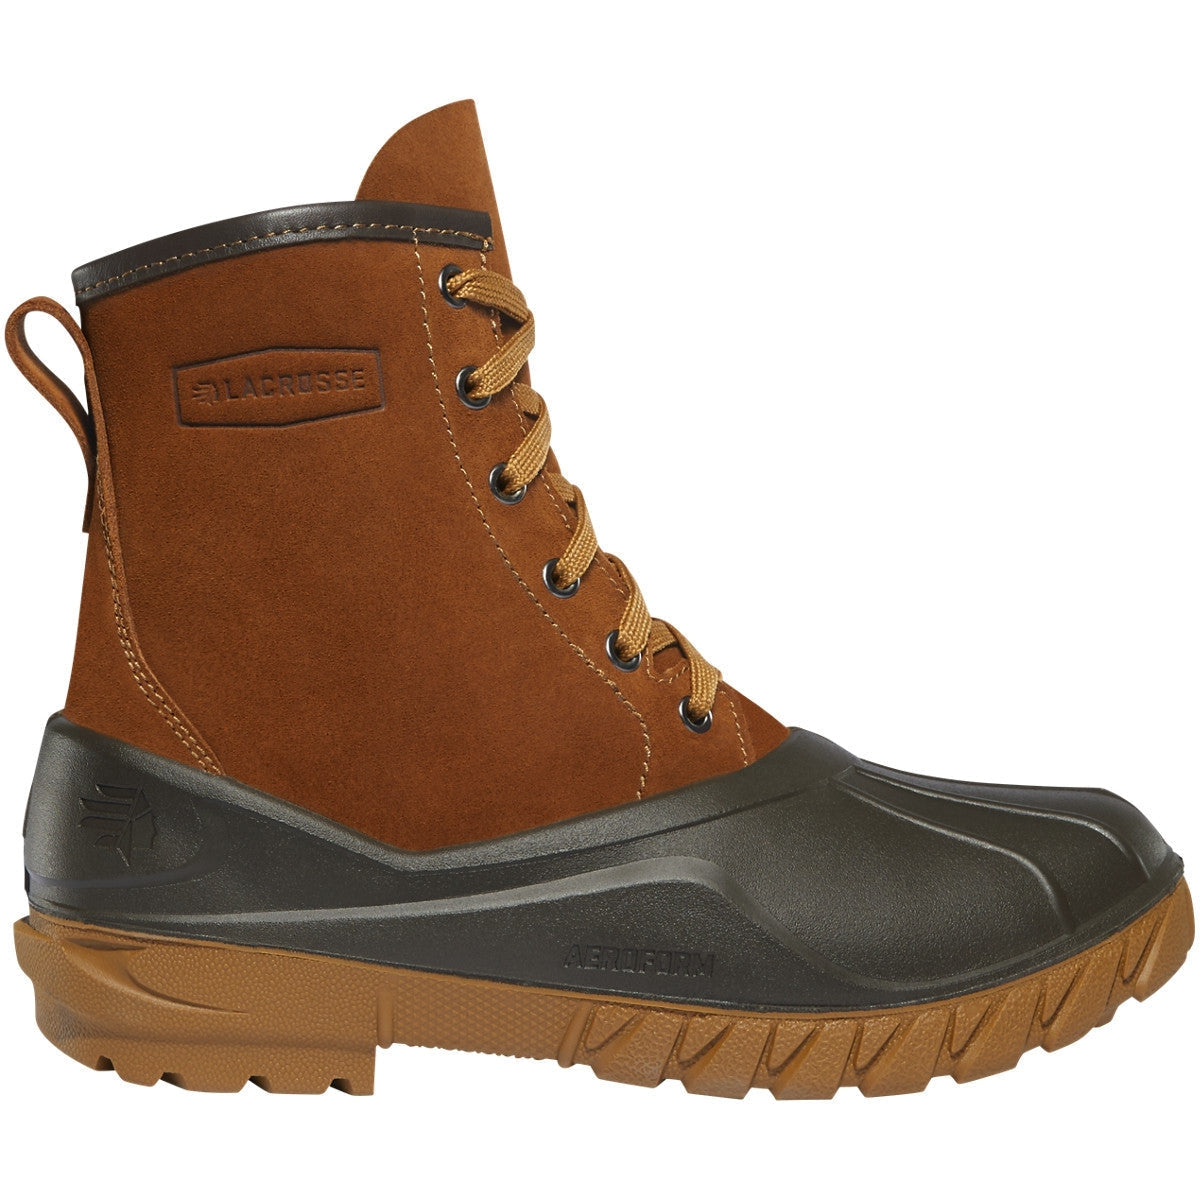 Lacrosse Women's Aero Timber Top 8" Soft Toe WP Boot - Brown - 664503 5 / Brown - Overlook Boots